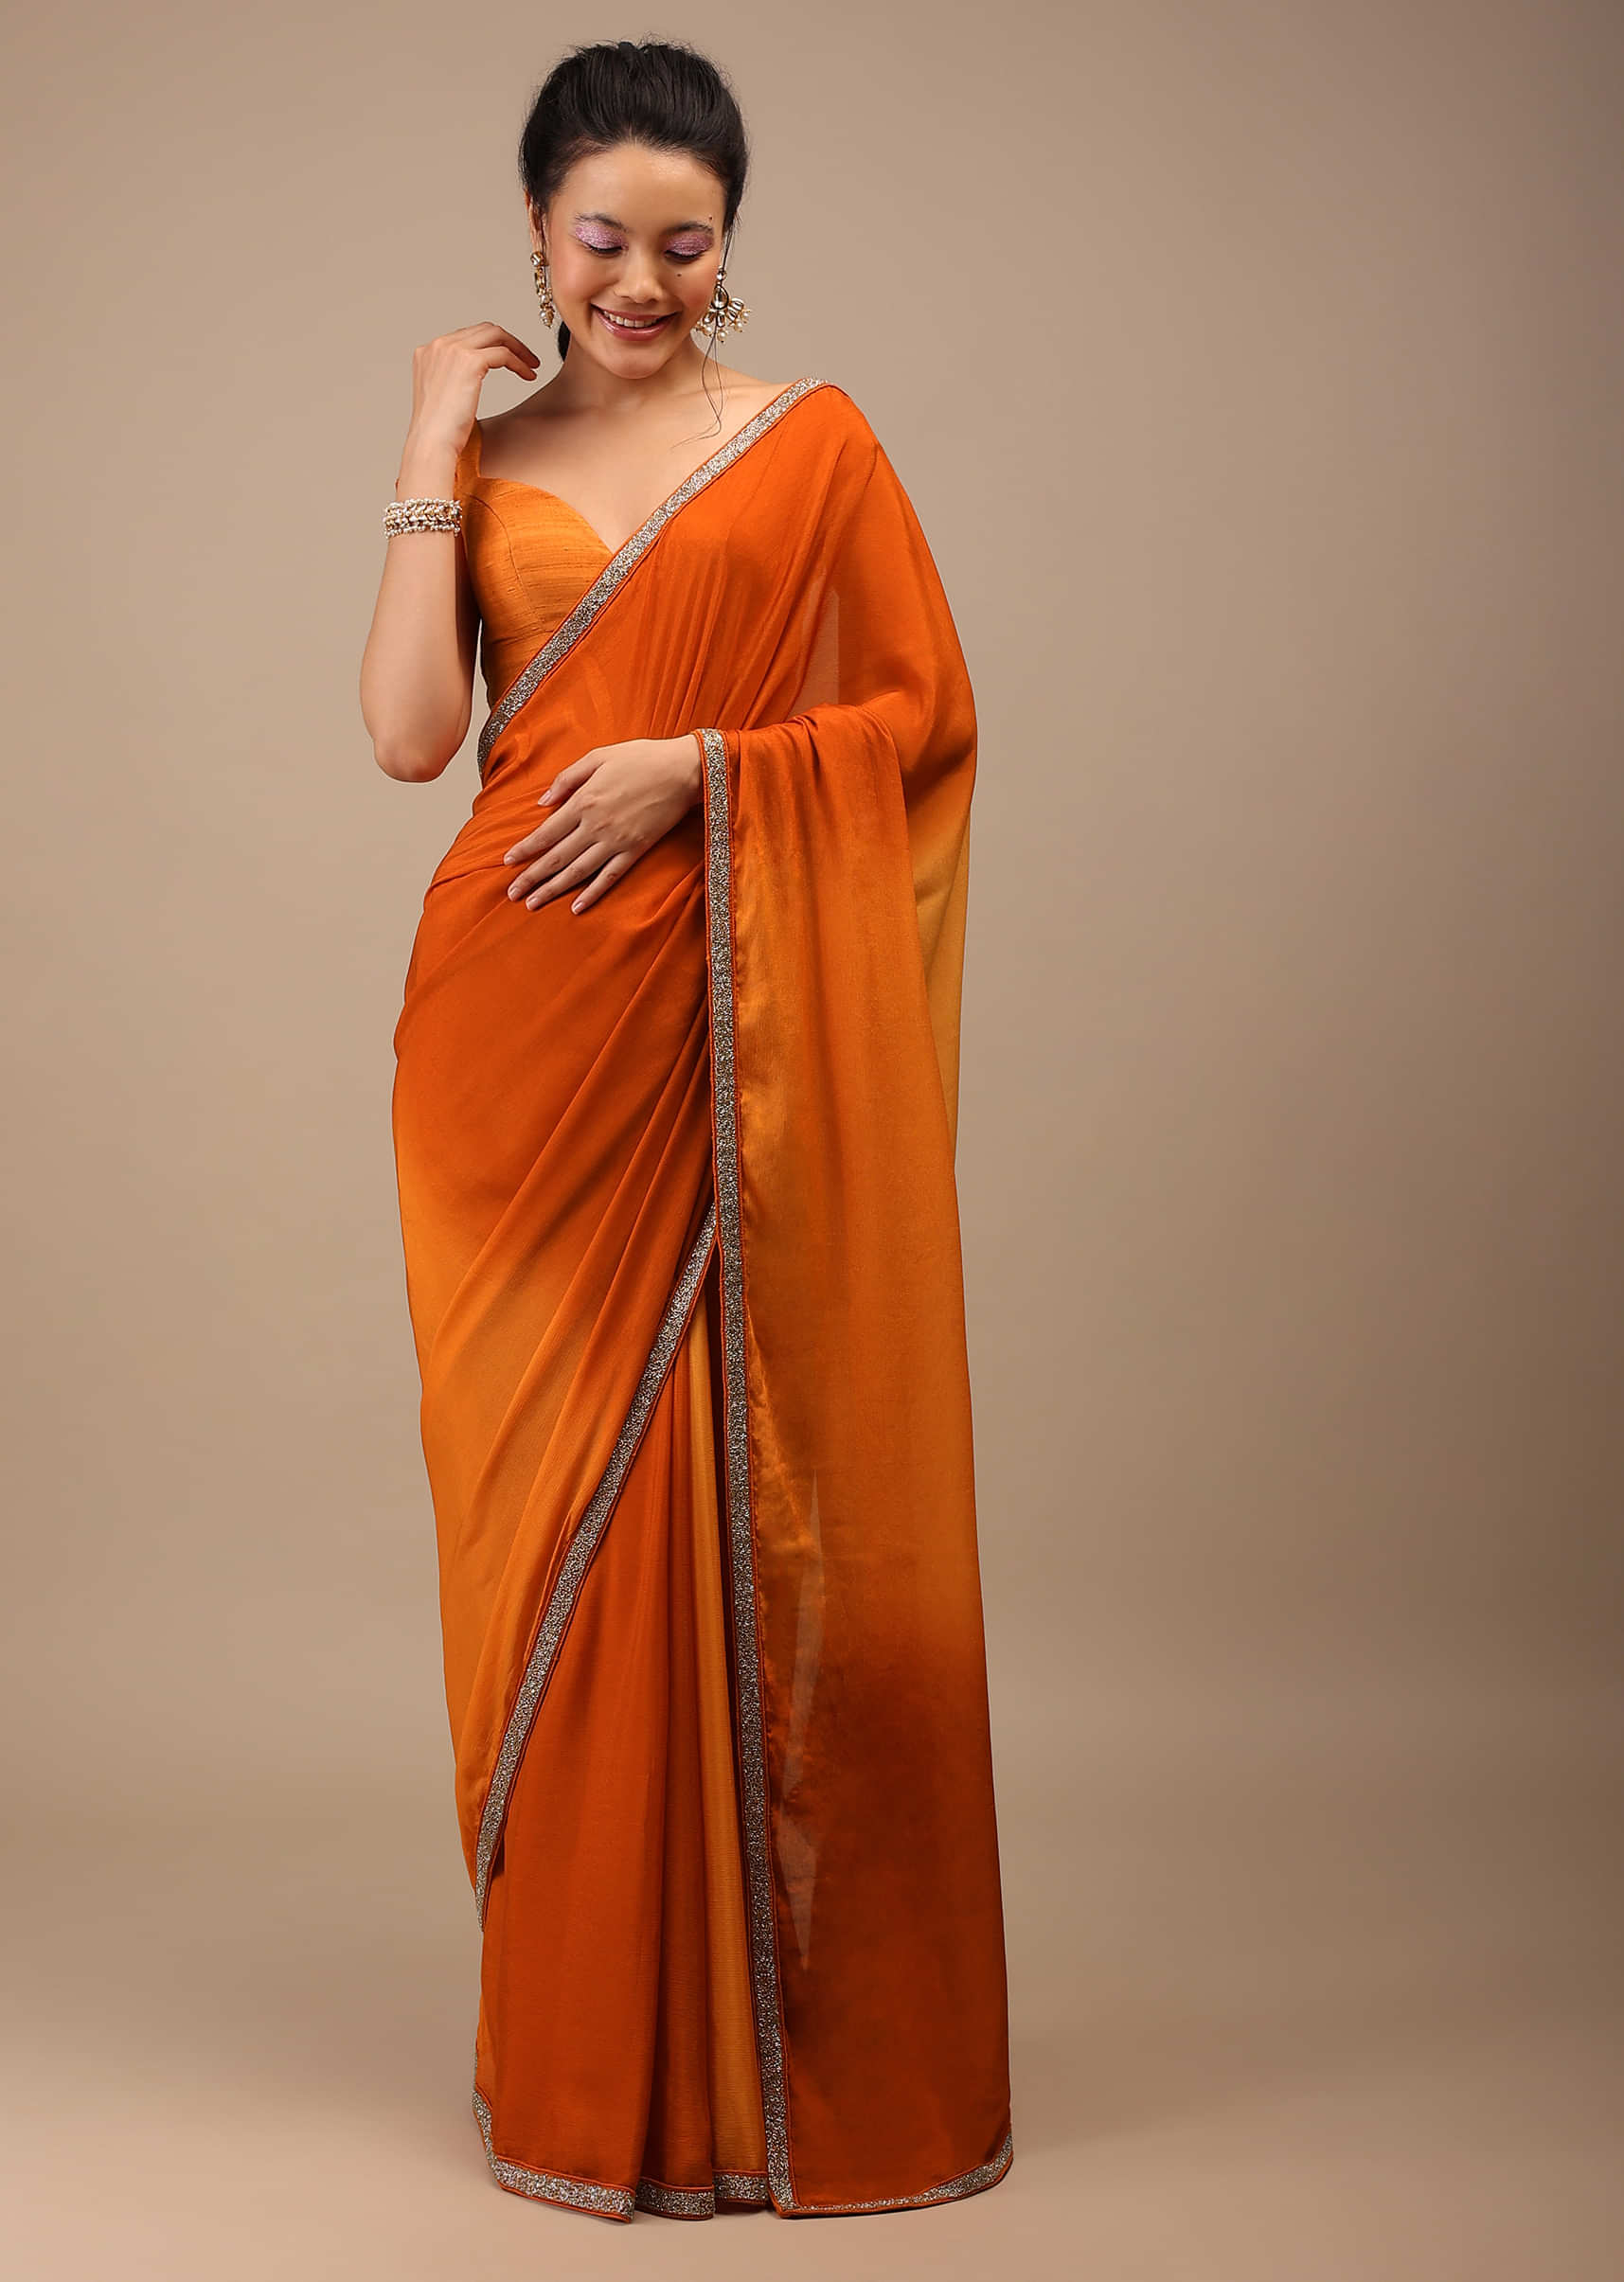 Spicy Orange Ombre Chiffon Saree With Buttis and Cut Dana Embroidery